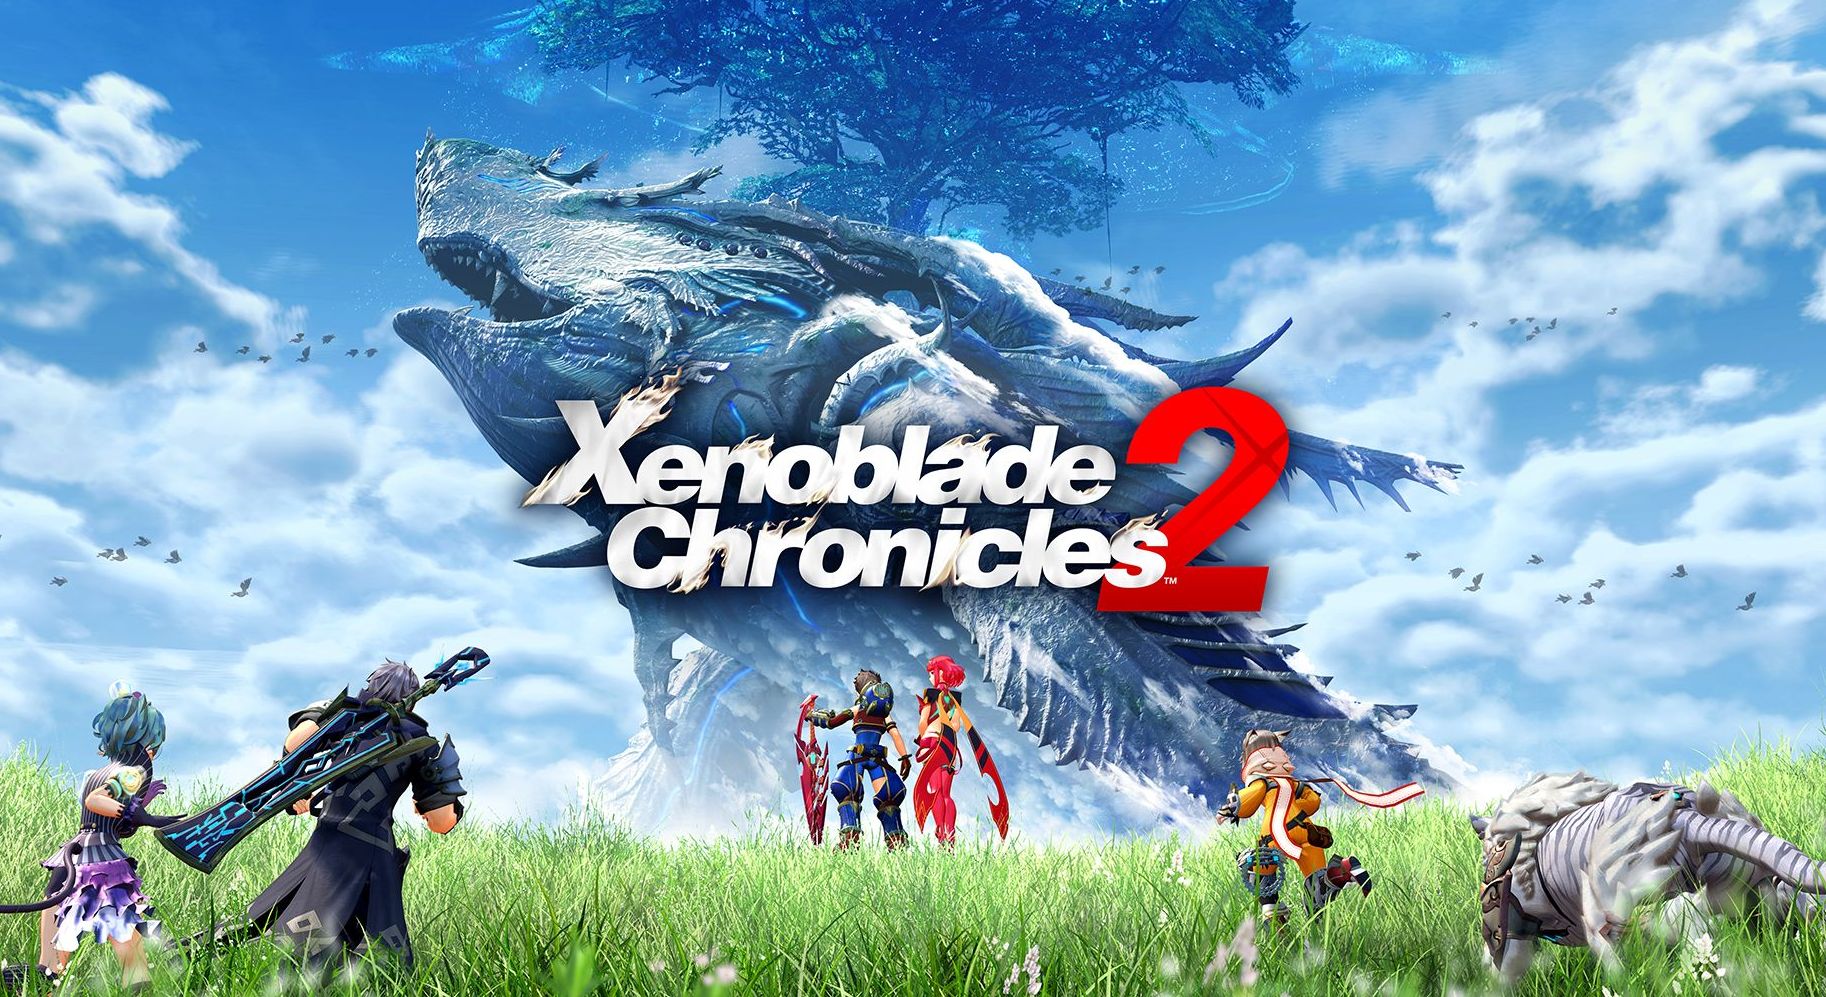 A review of the game Xenoblade Chronicles 2